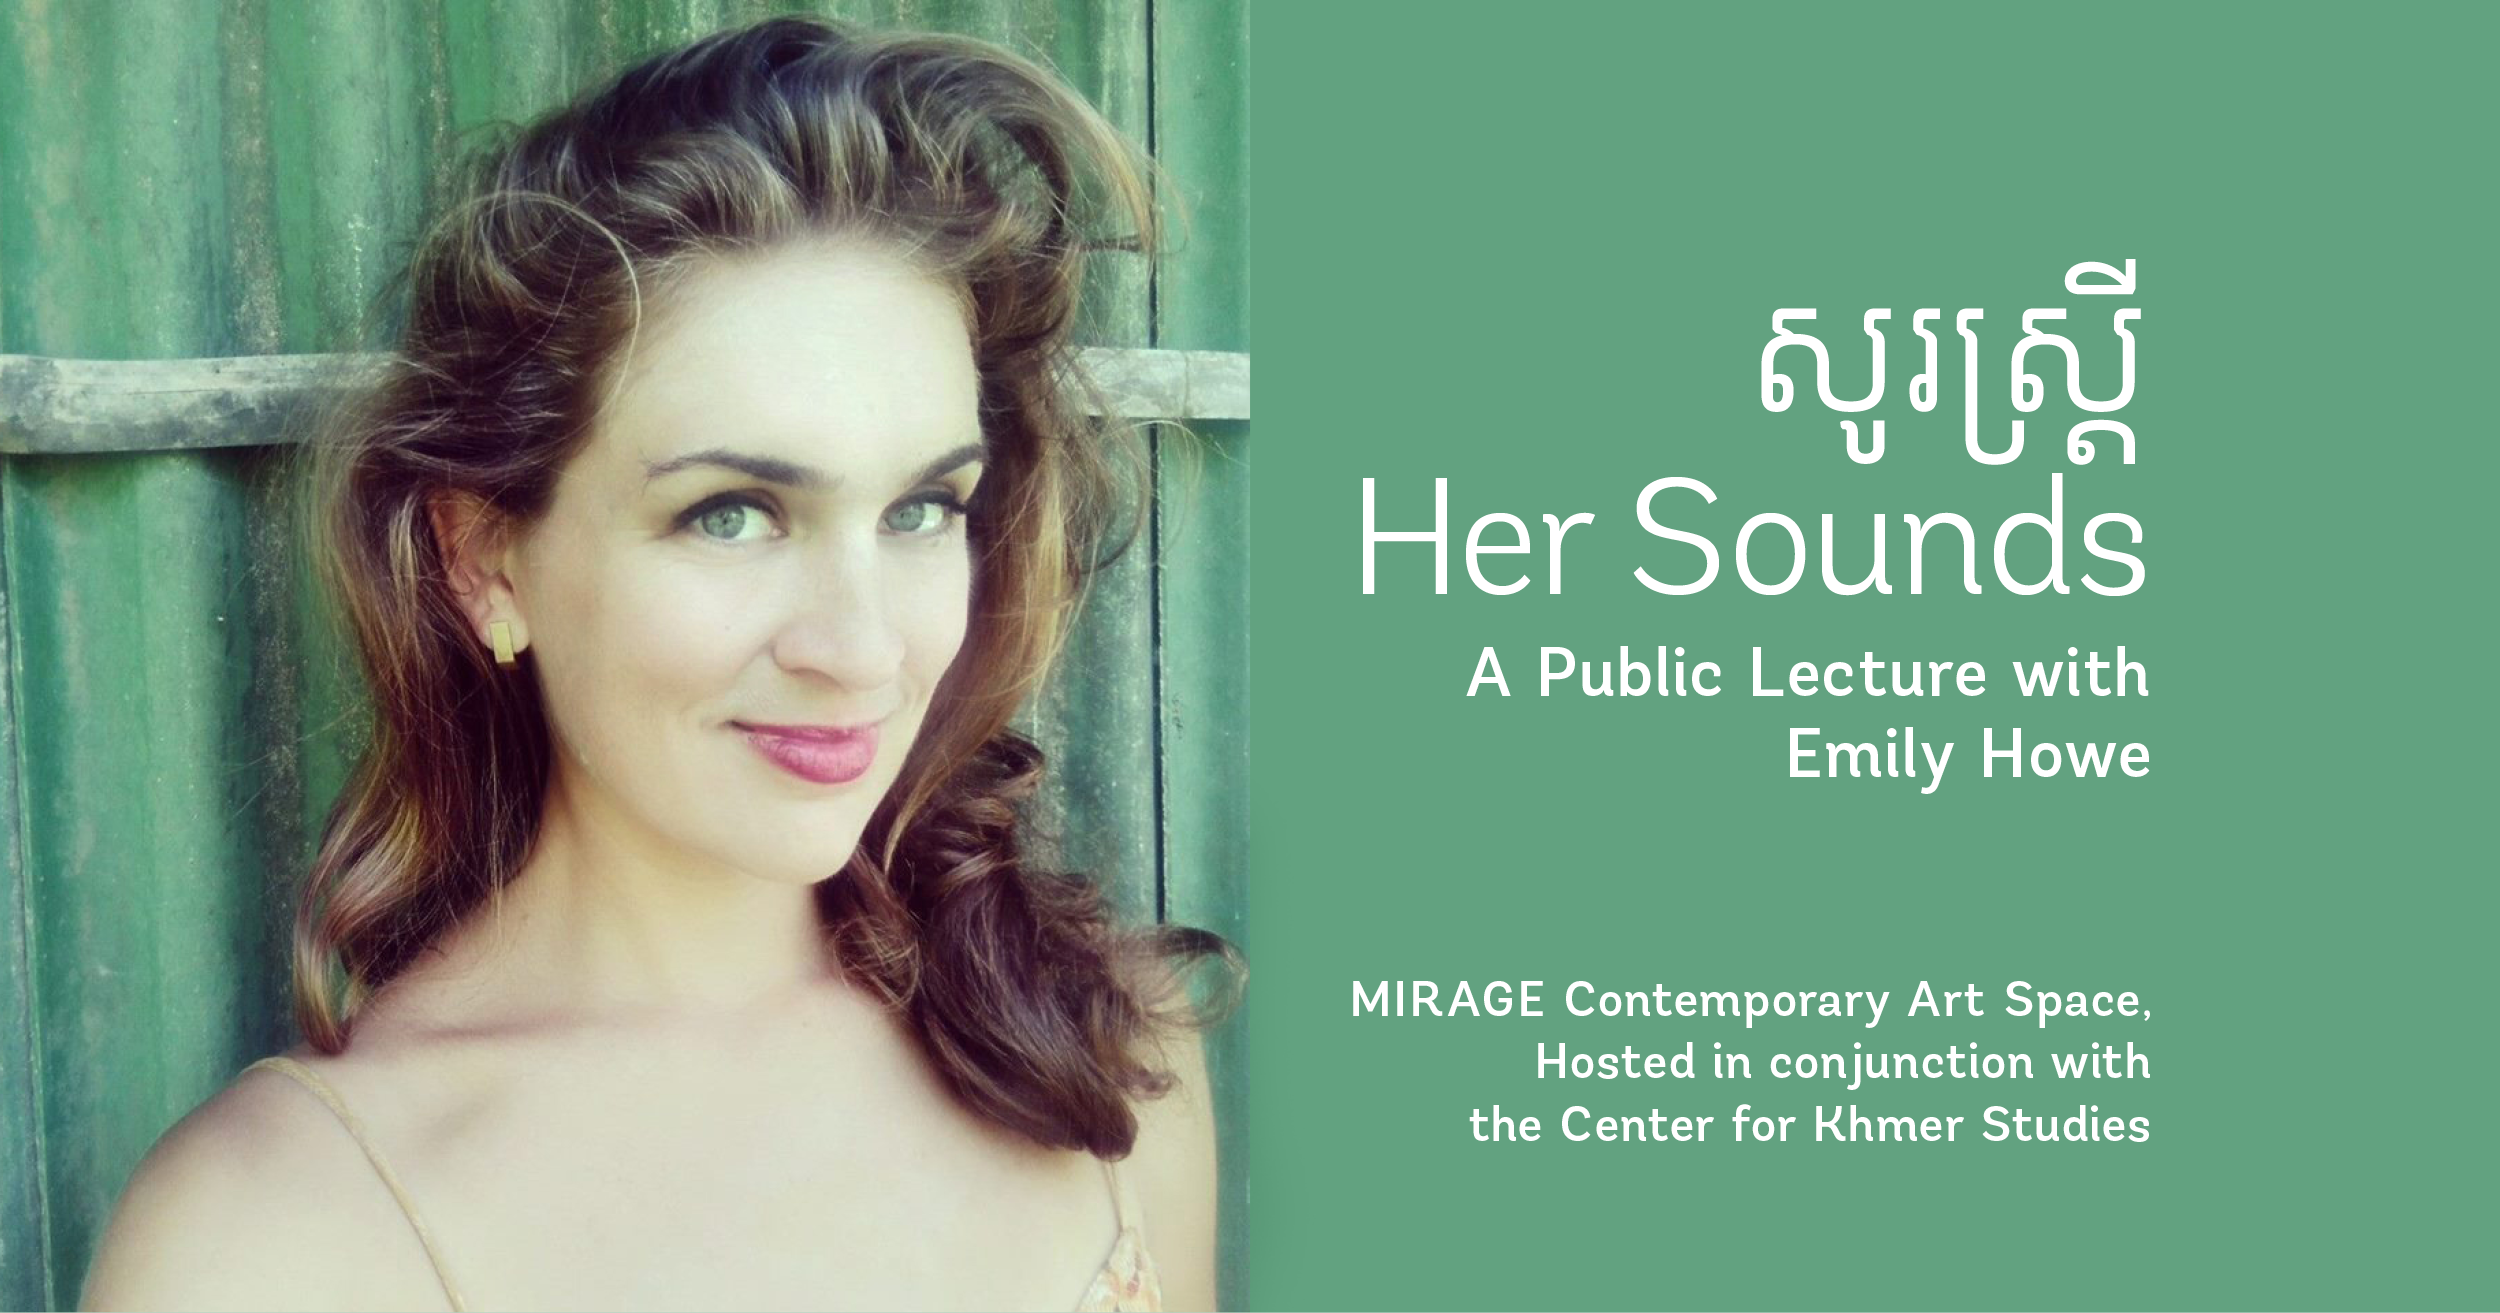 Public Lecture with Emily Howe at MIRAGE Contemporary Art Space in Siem Reap, Cambodia